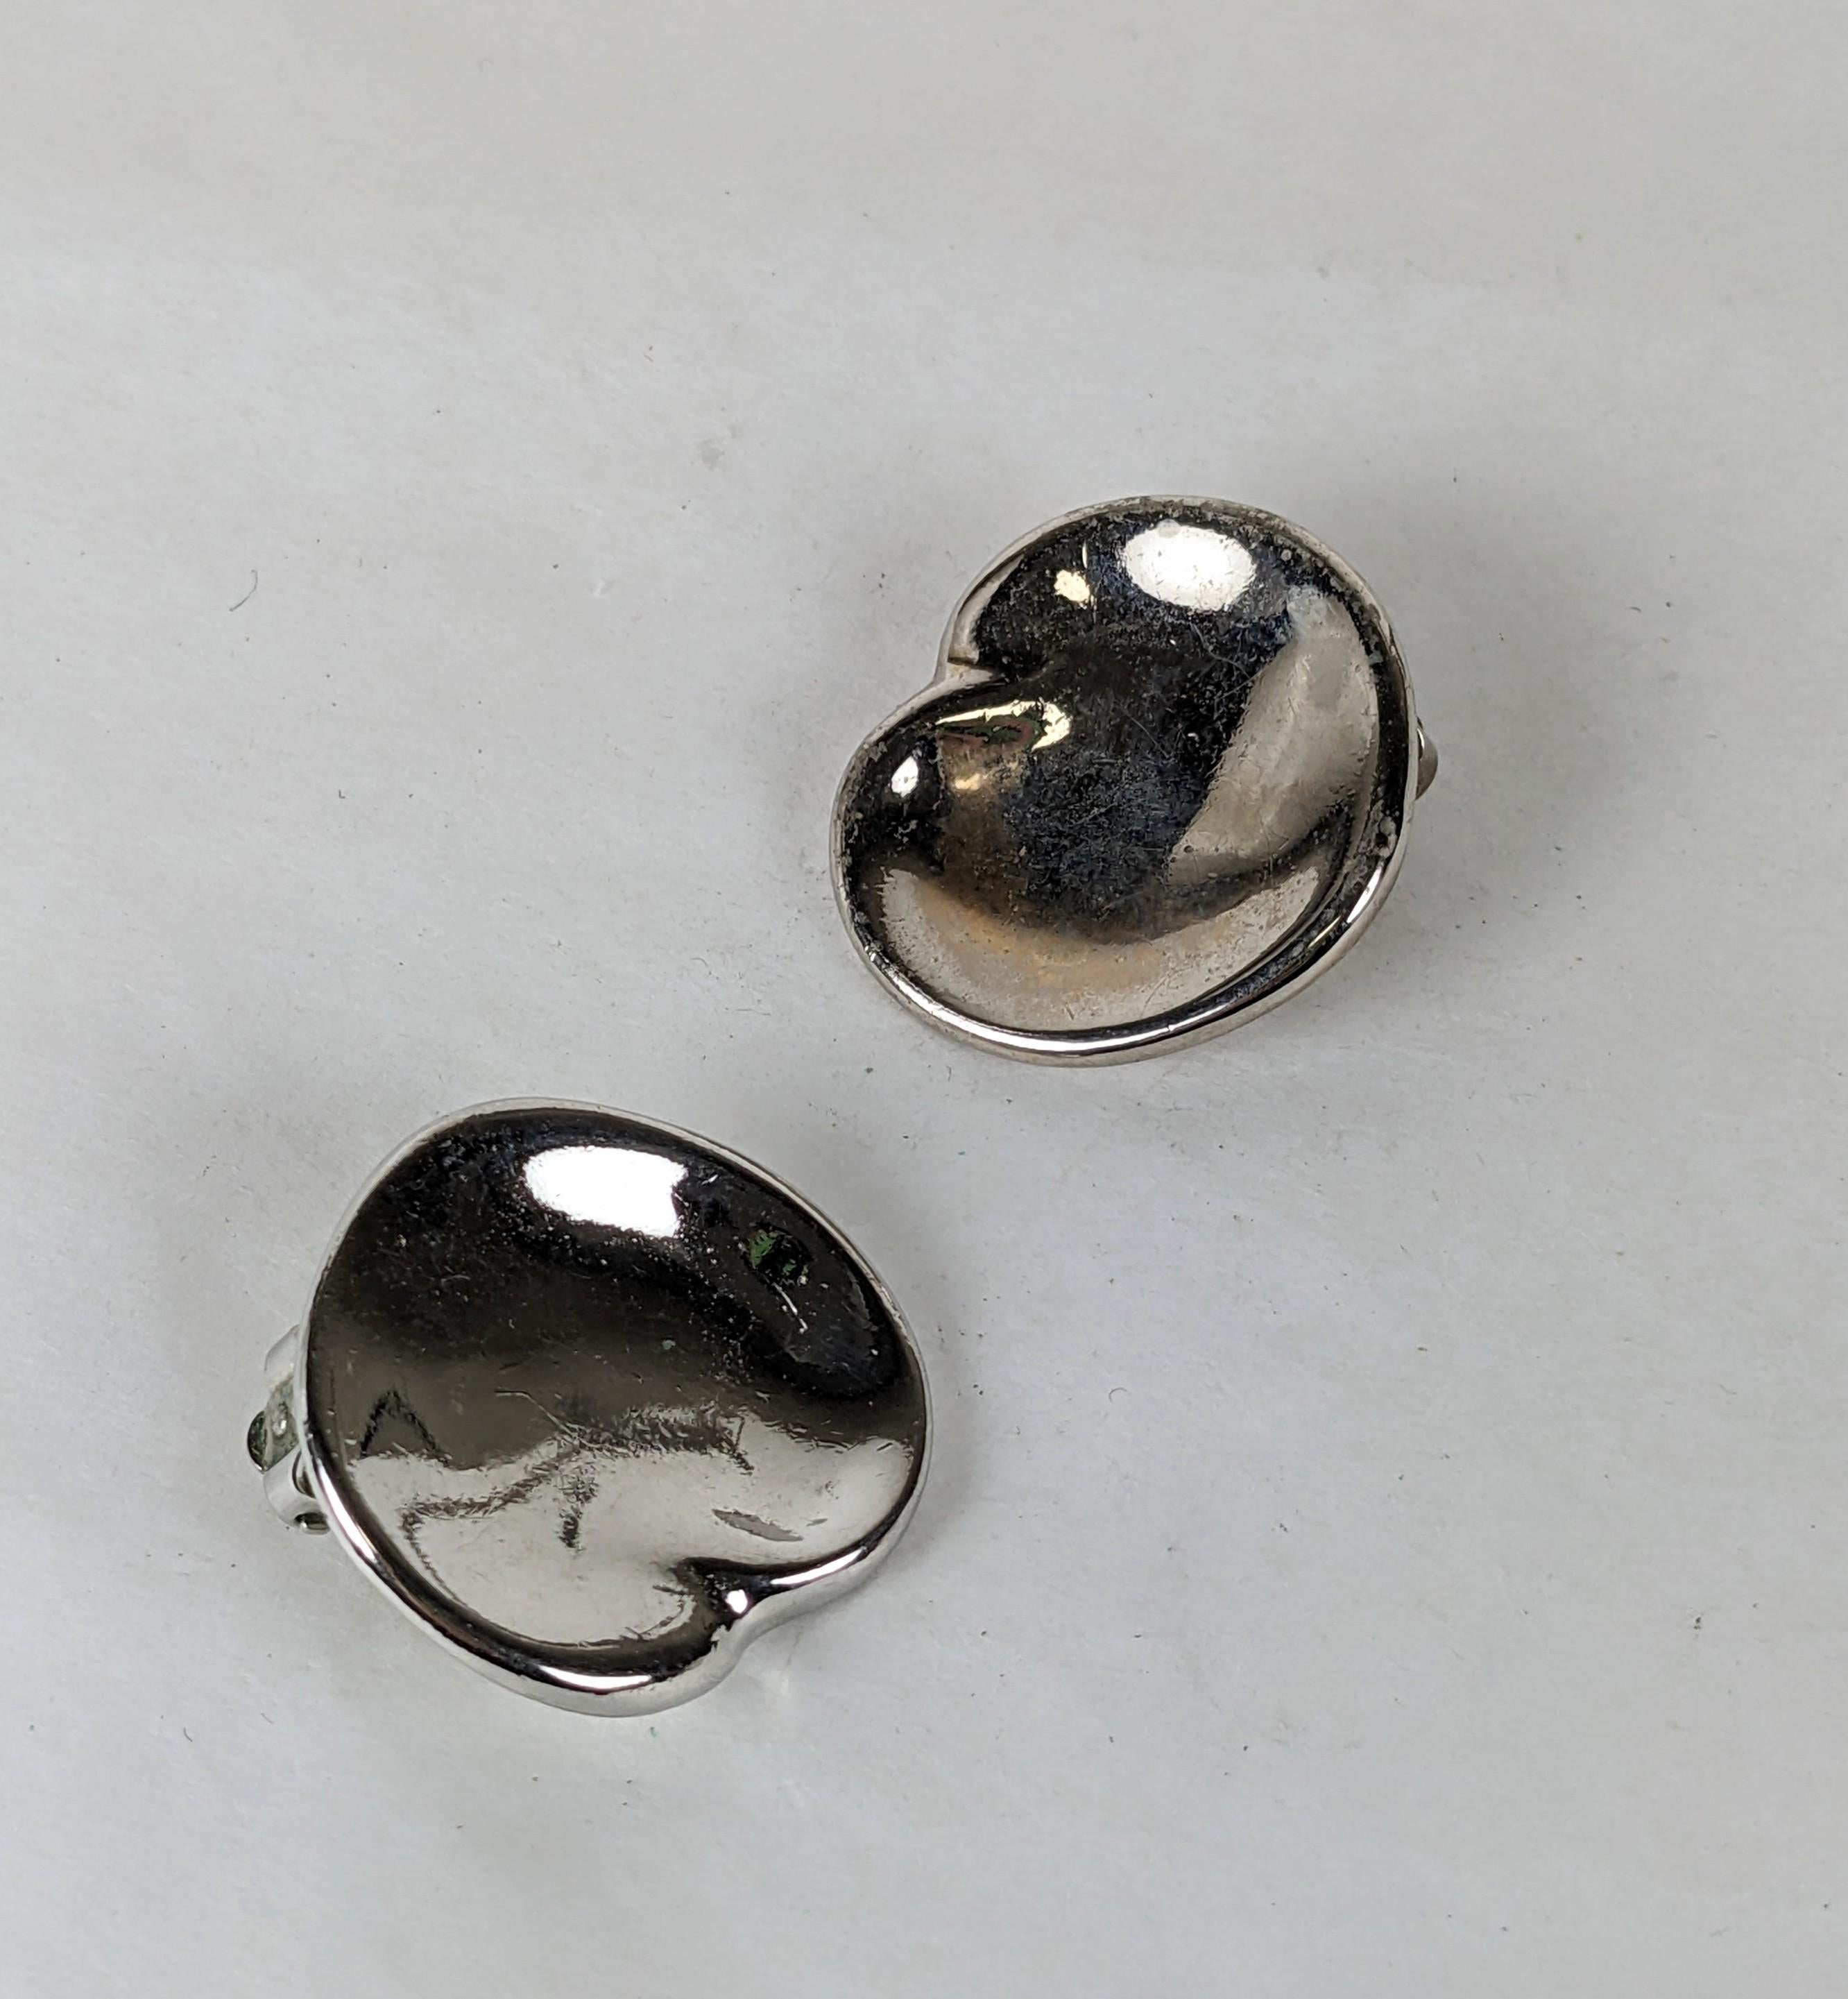 Rare Heart form earrings by Halston from the 1970's. Silvertoned metal design inspired by Elsa Peretti but labeld for the Halston line. 
Very little jewelry was produced by Halston. 1970's USA. 
Clip back fittings, 1